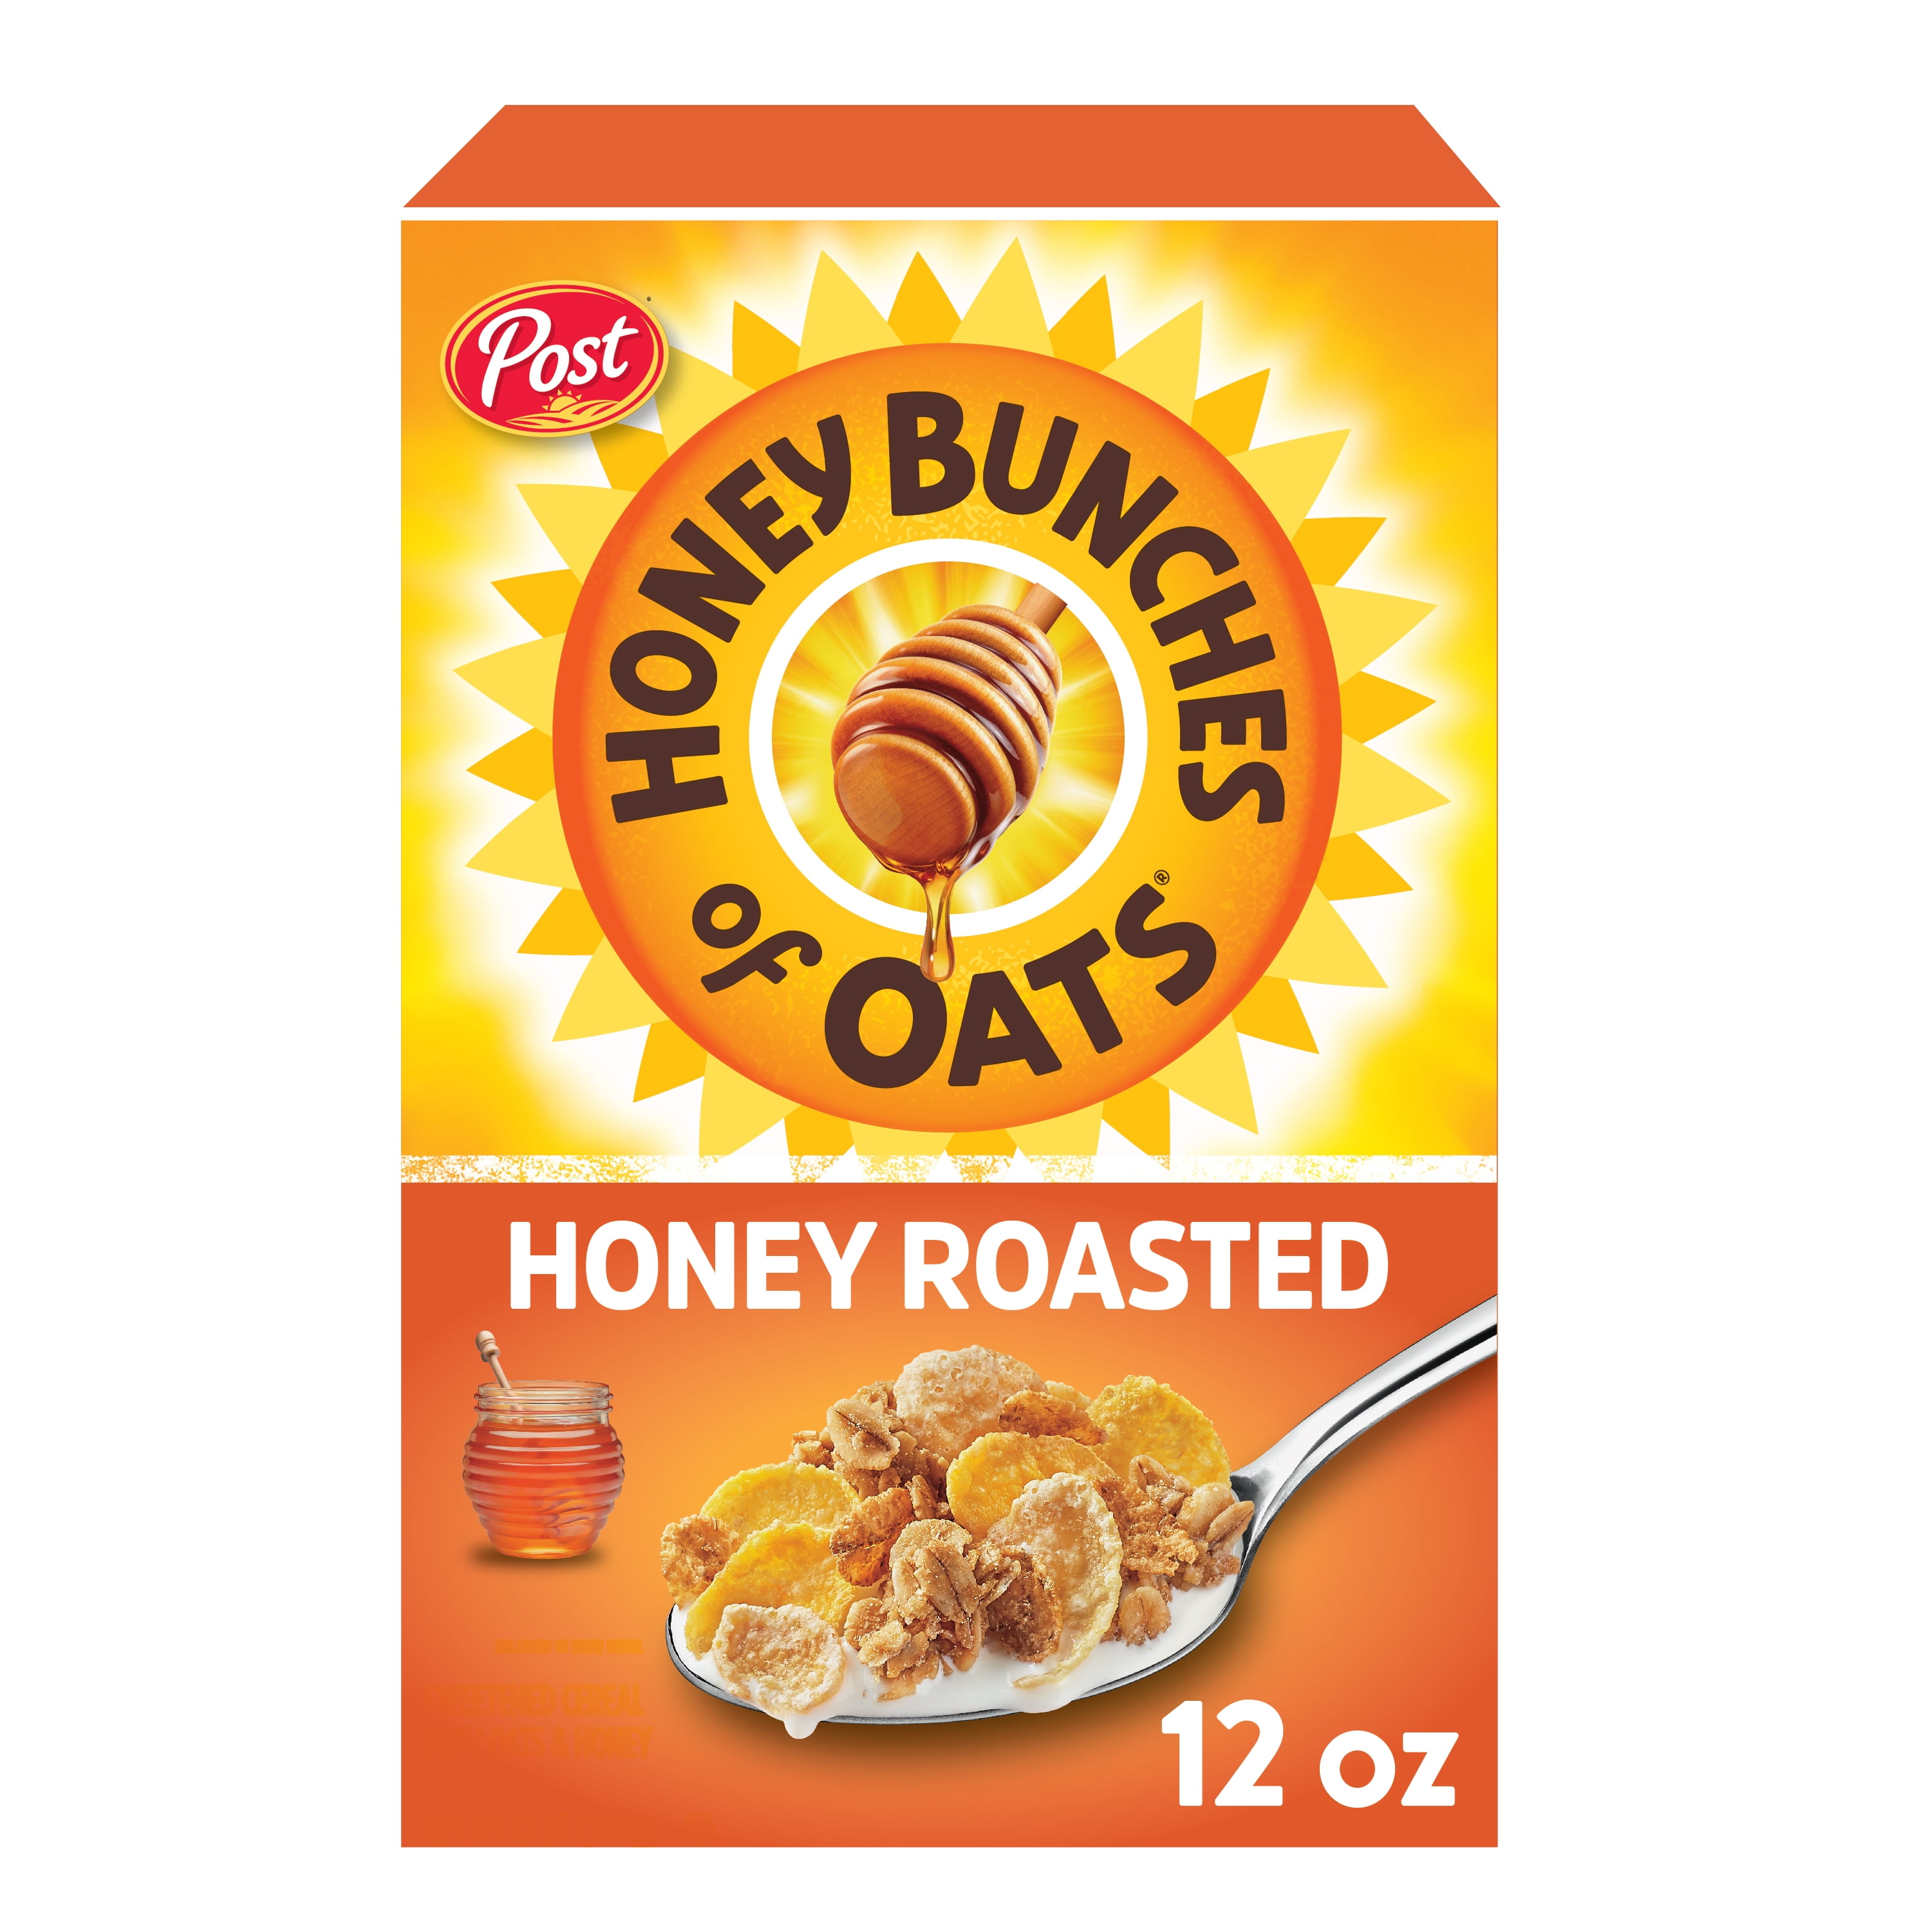 Post Honey Bunches of Oats Honey Roasted Breakfast Cereal, 12 OZ Box